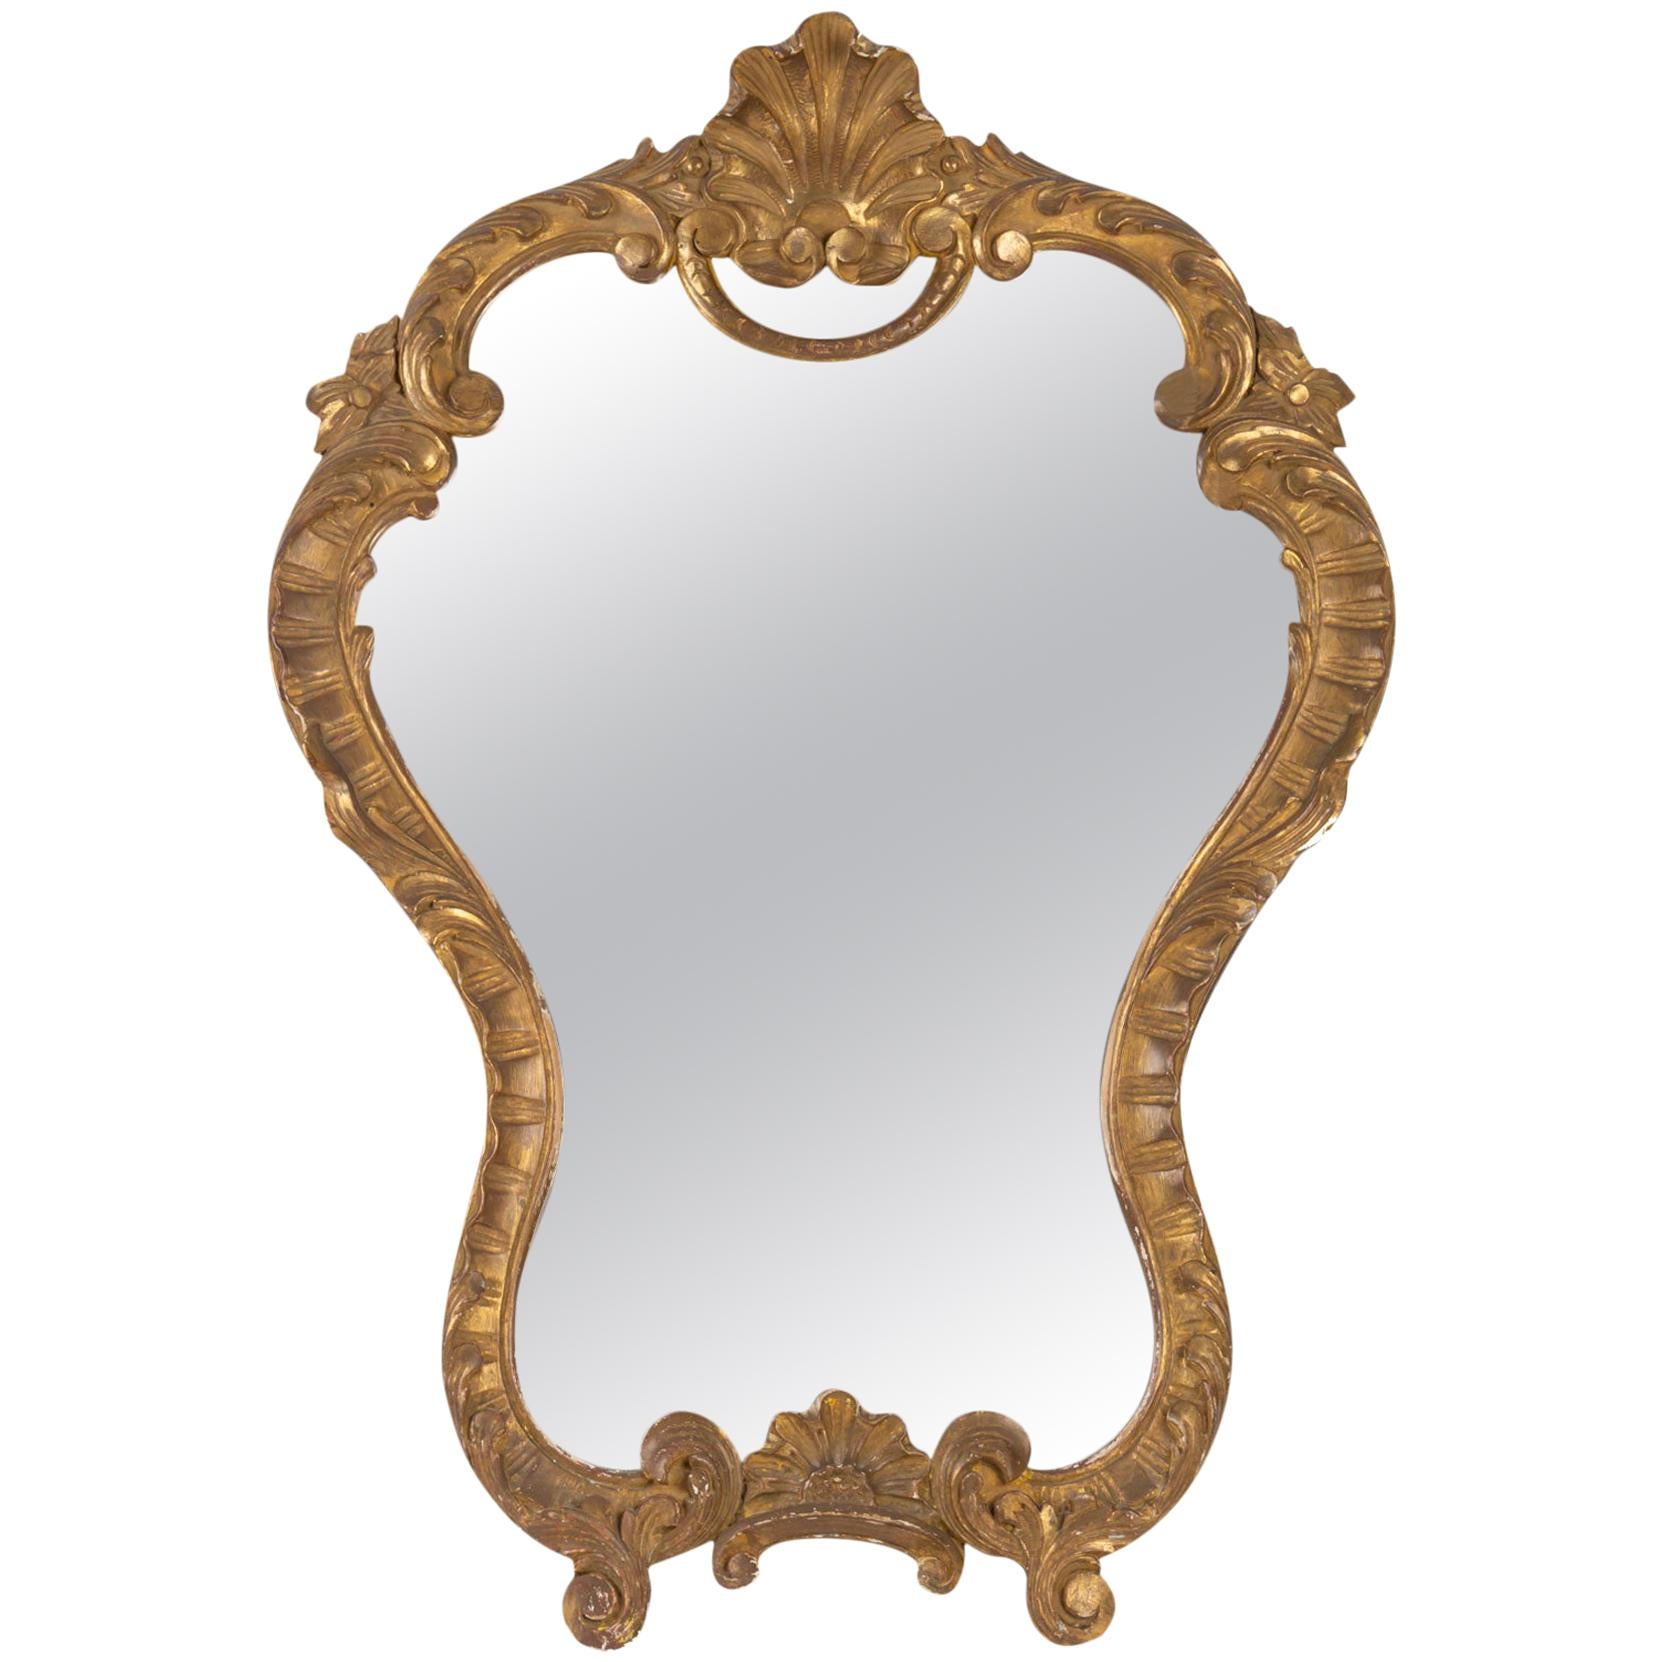 Carved and Patinated Wooden Mirror in the Louis XV Style